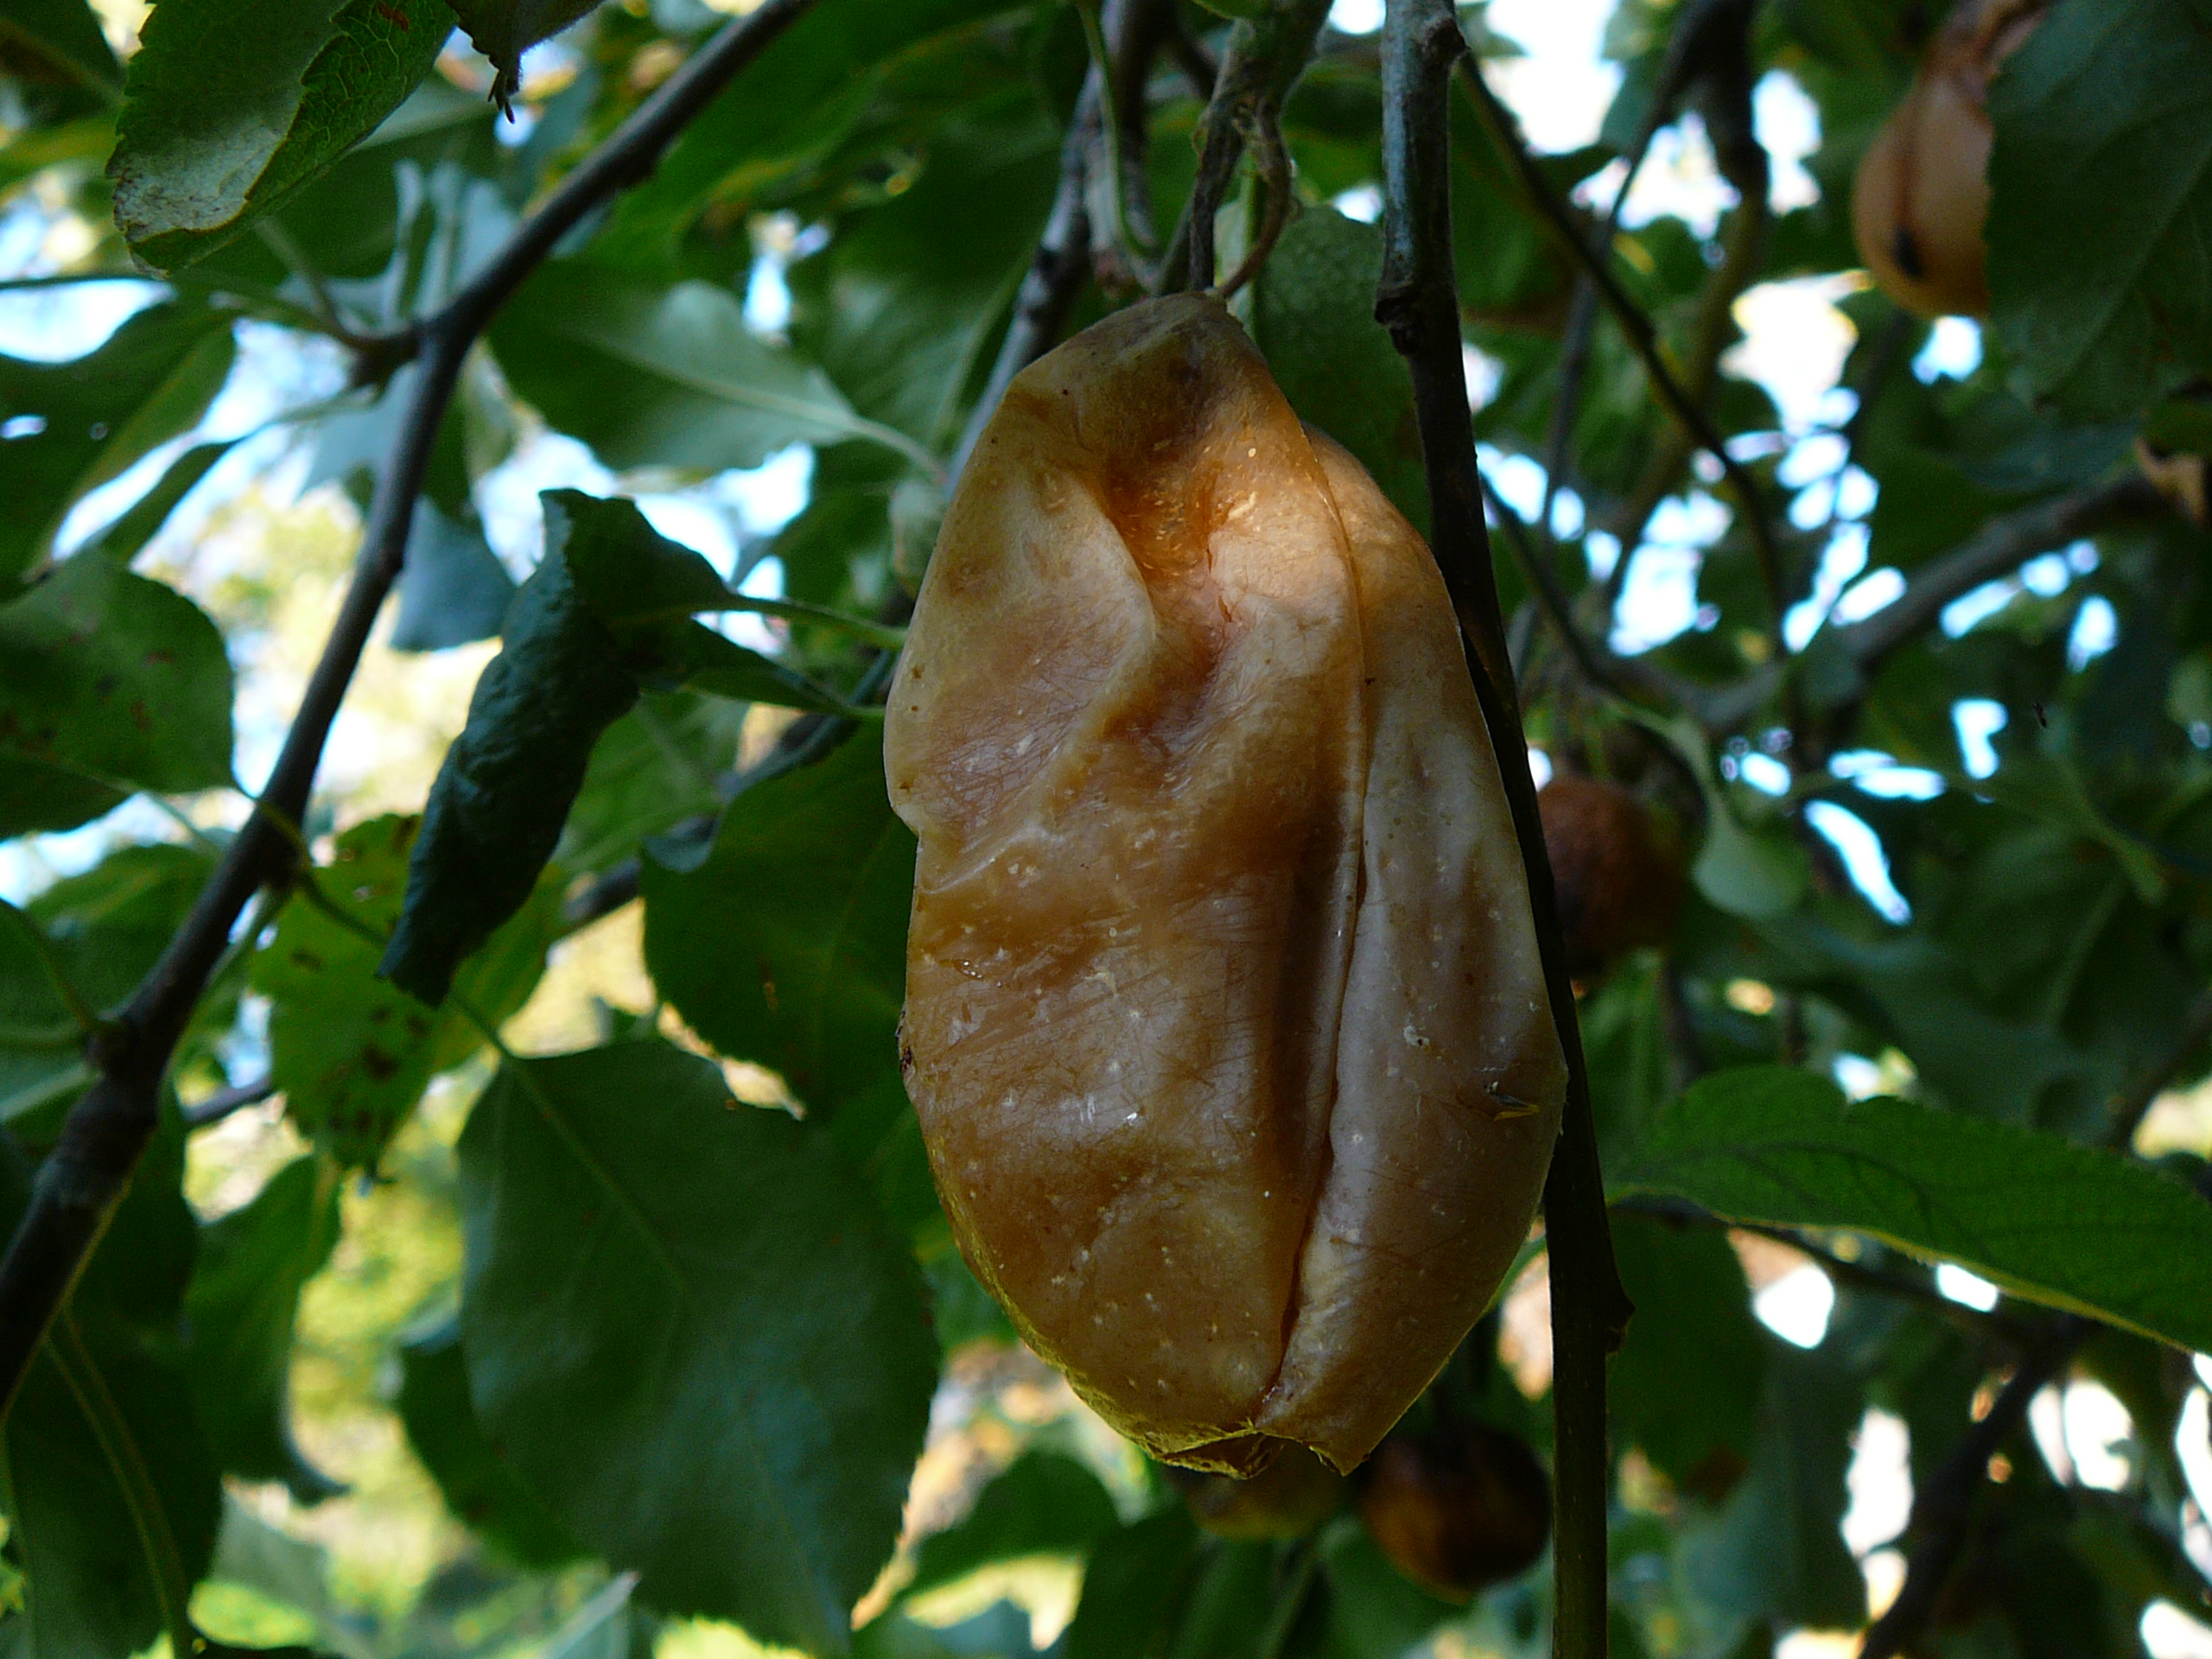 Apples shriveling and rotting on the tree - Ask an Expert